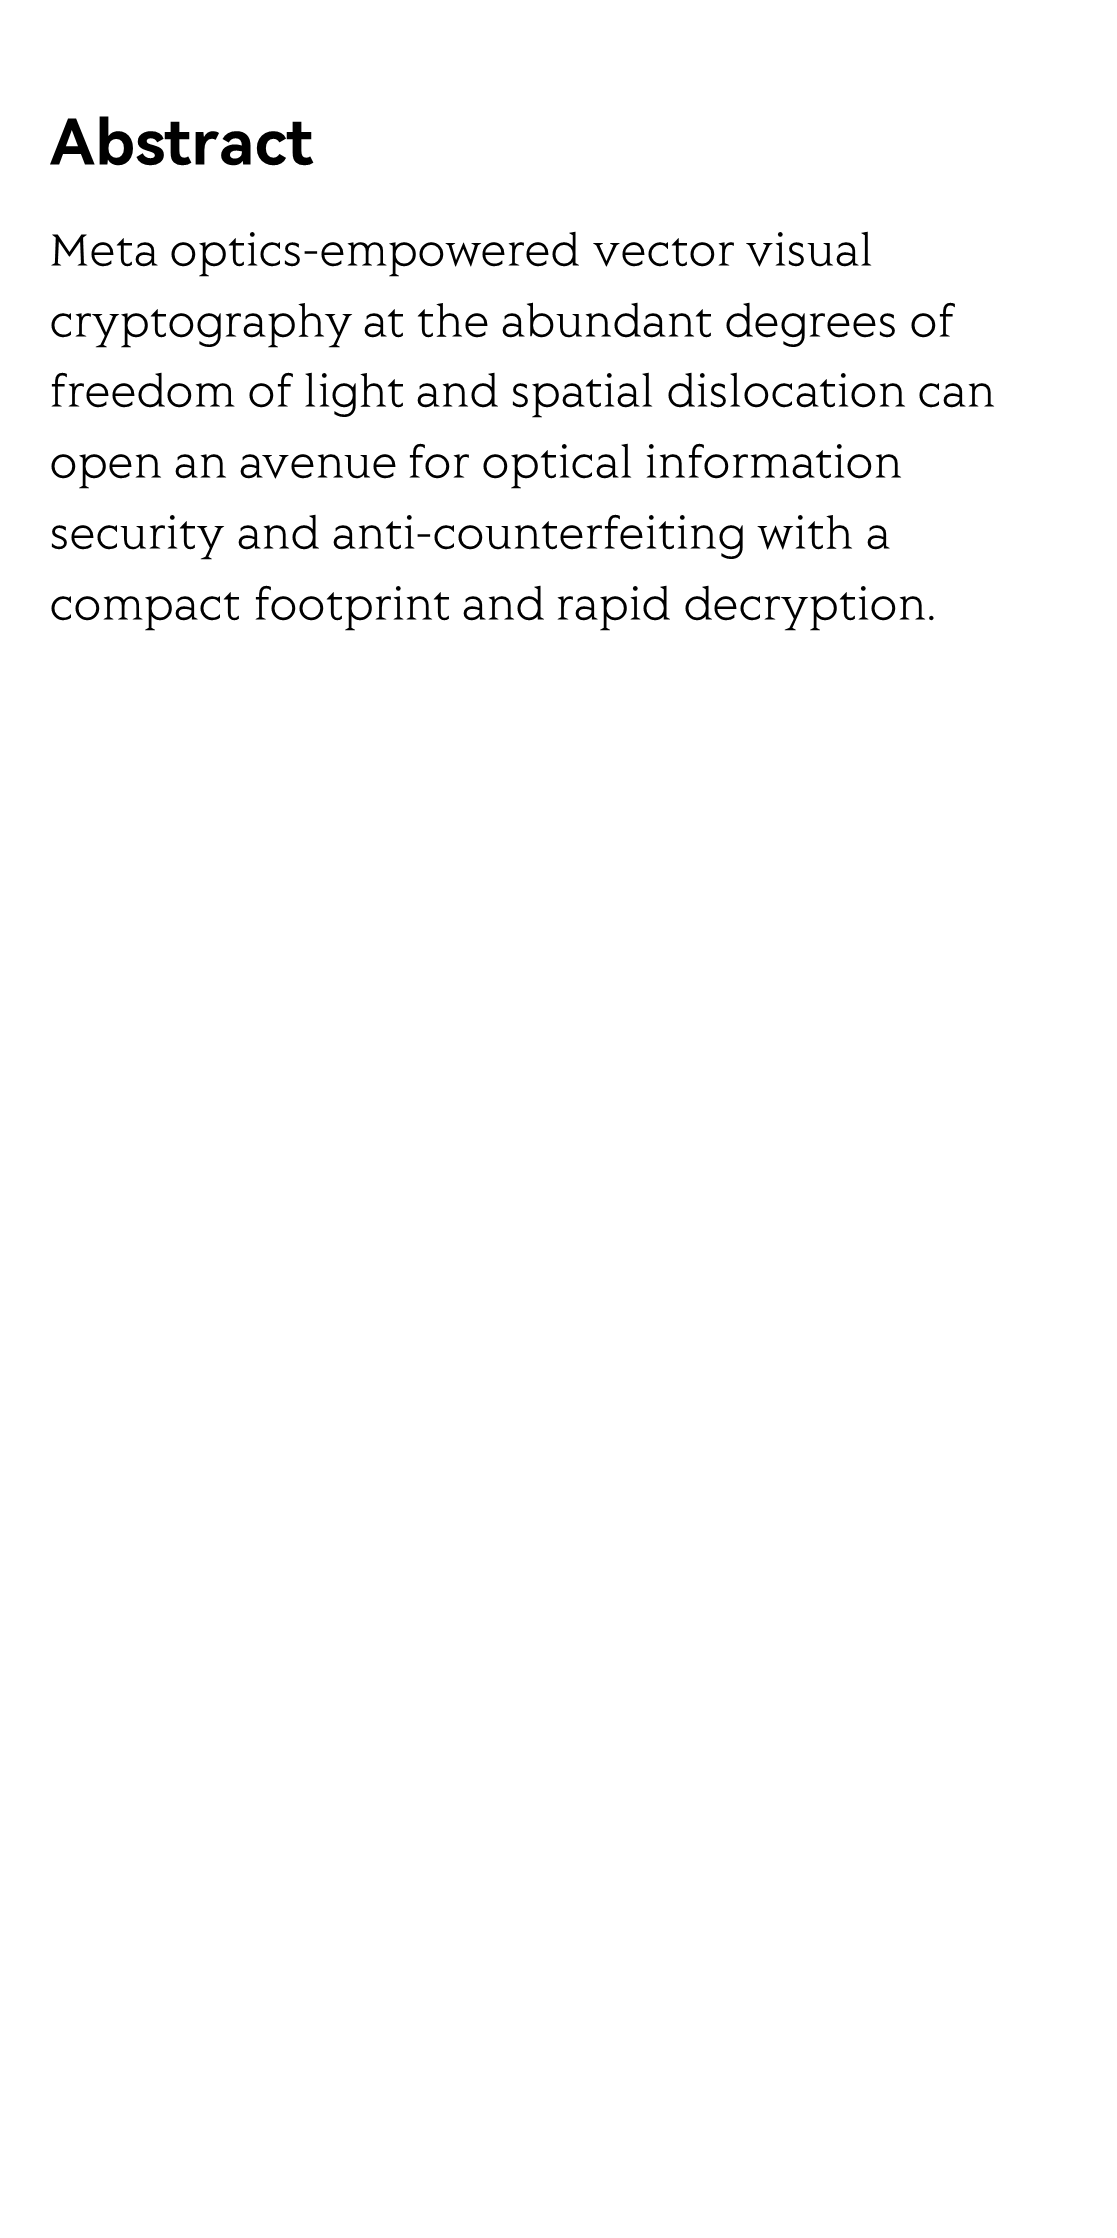 All-optical vector visual cryptography with high security and rapid decryption_2